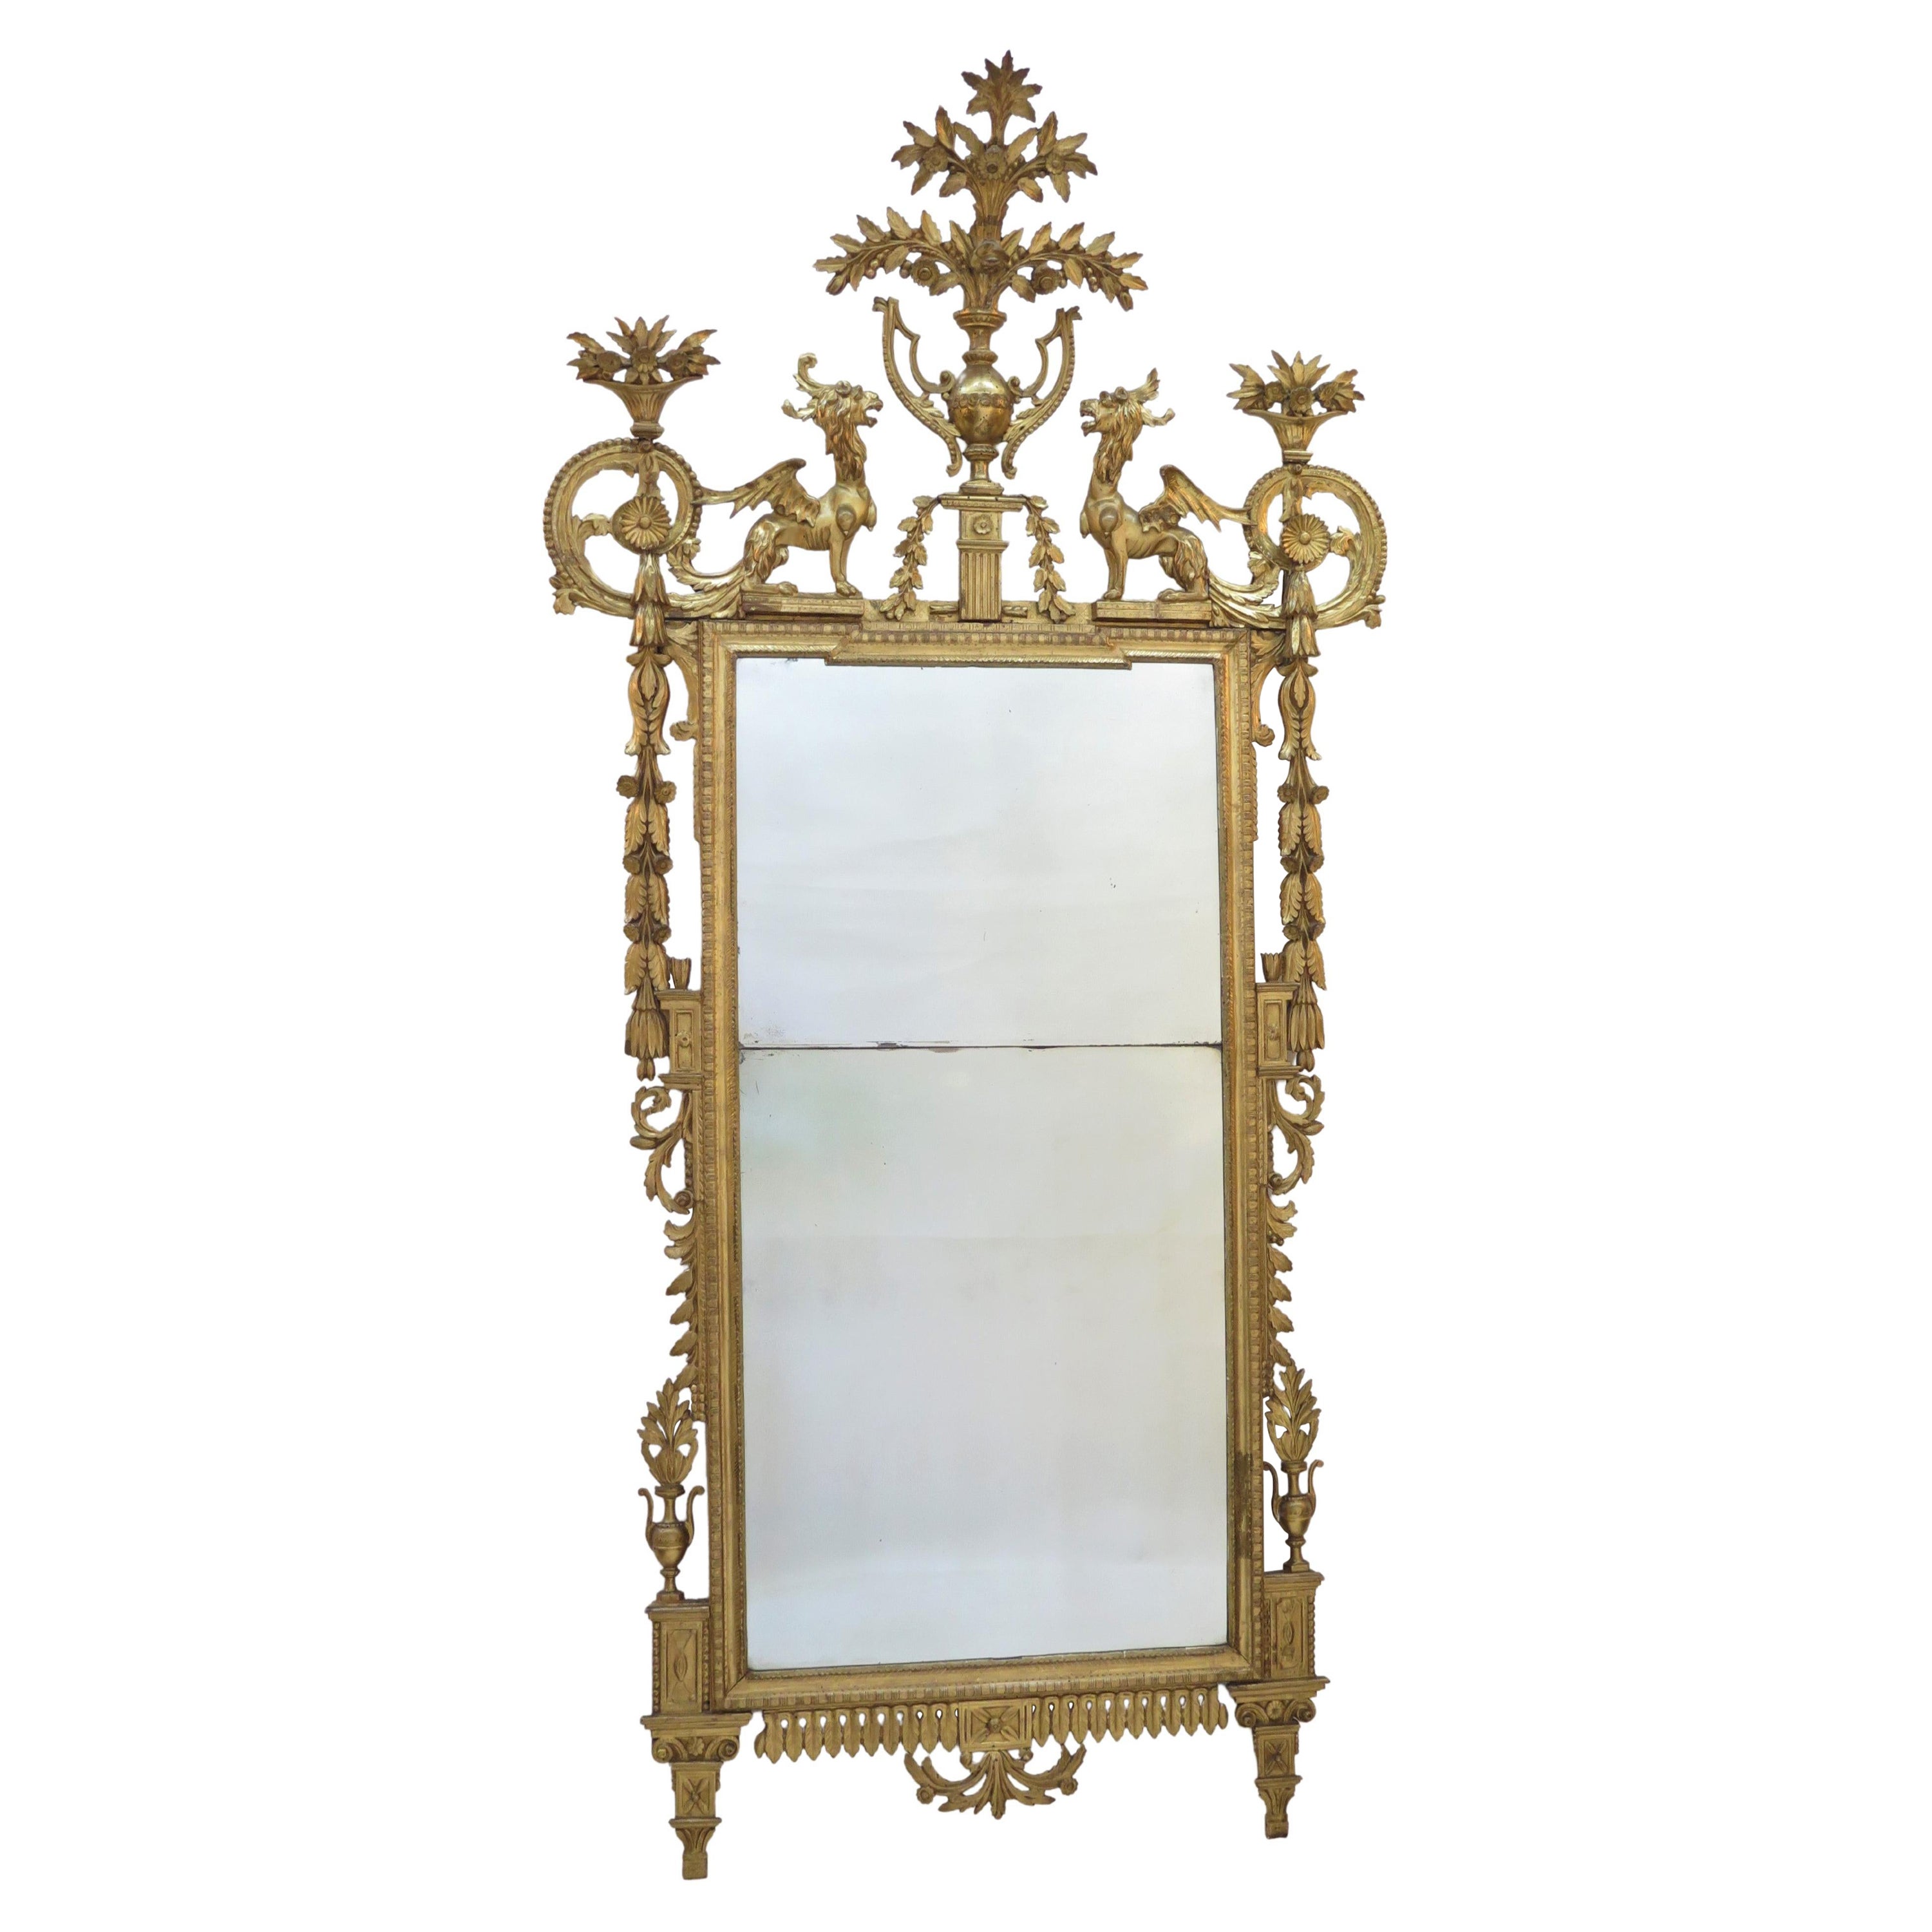 18th Century Italian (Tuscan) Neoclassical Giltwood Pier Glass For Sale